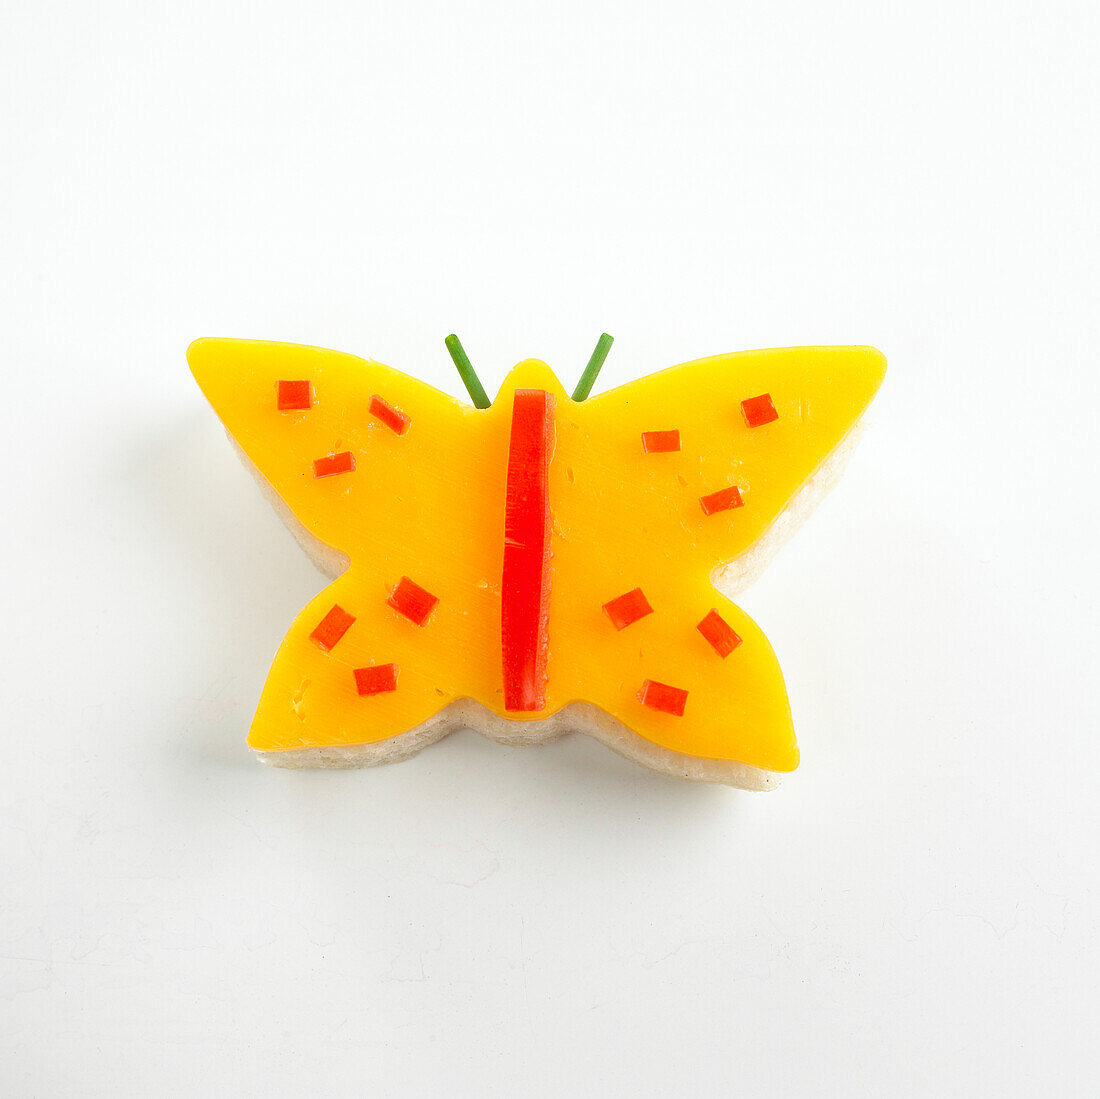 Butterfly-shaped cheese sandwich with peppers for decoration